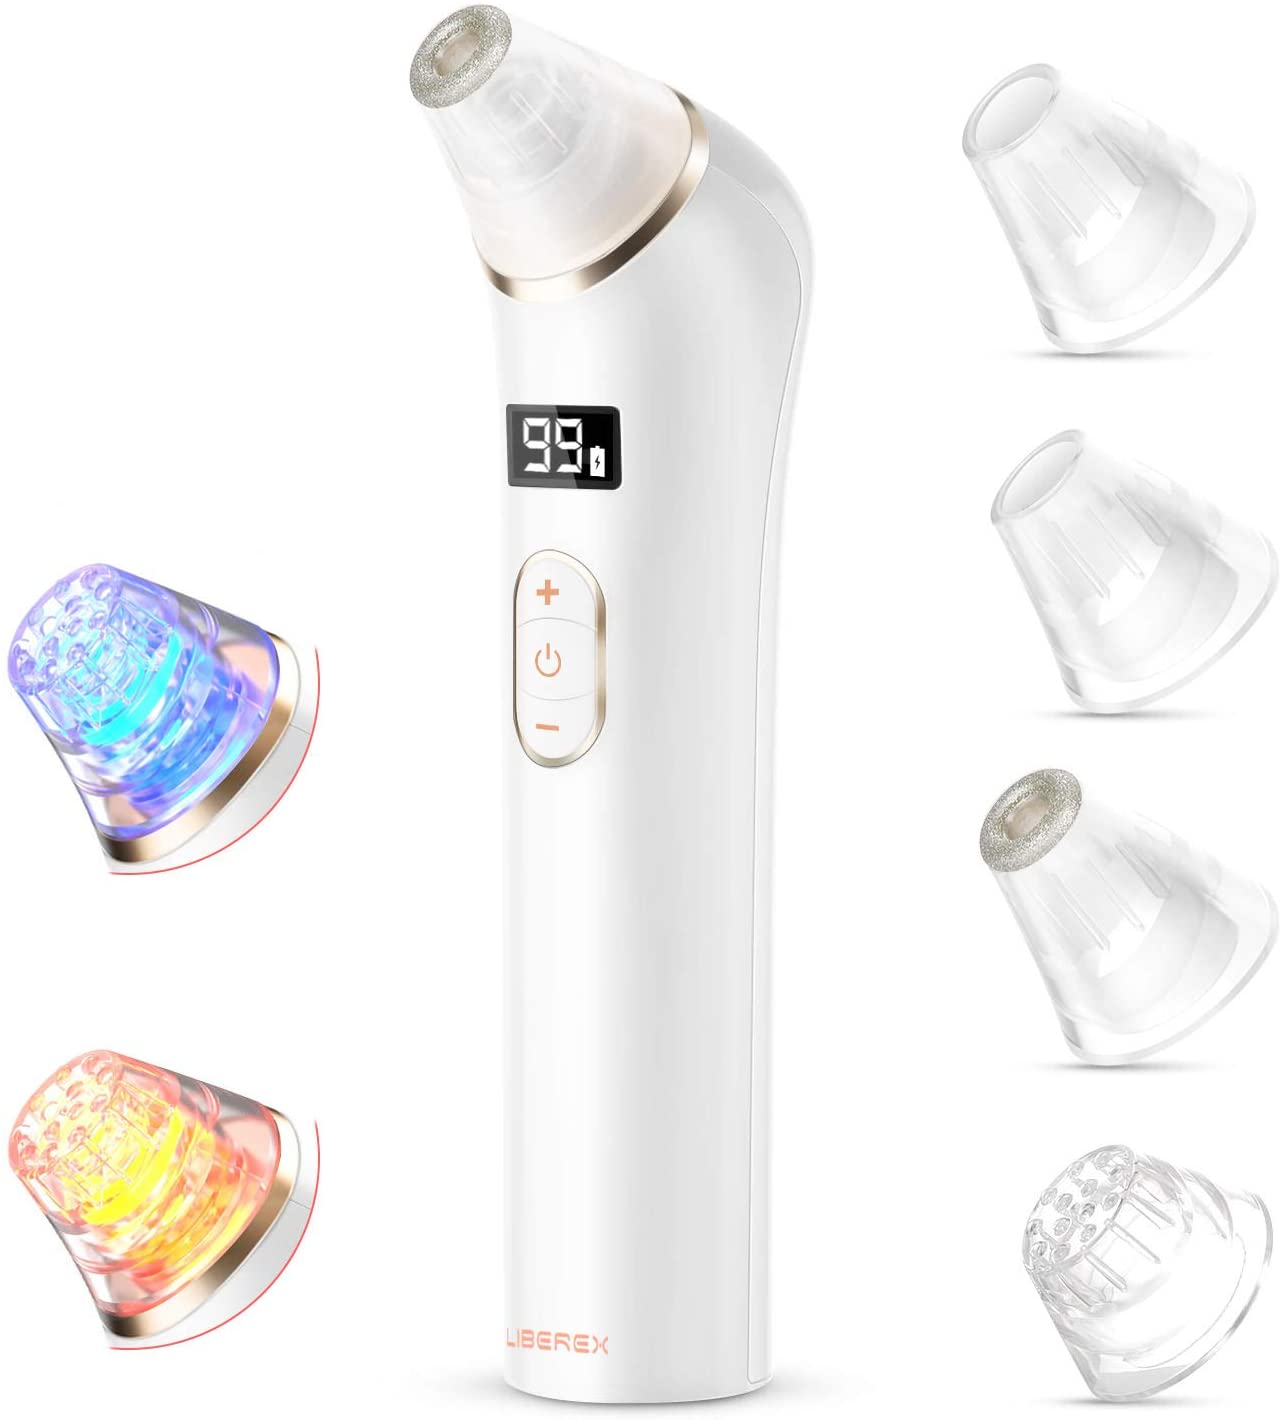 Removes blackheads with blue light for a perfect facial treatment with an American FDA standard